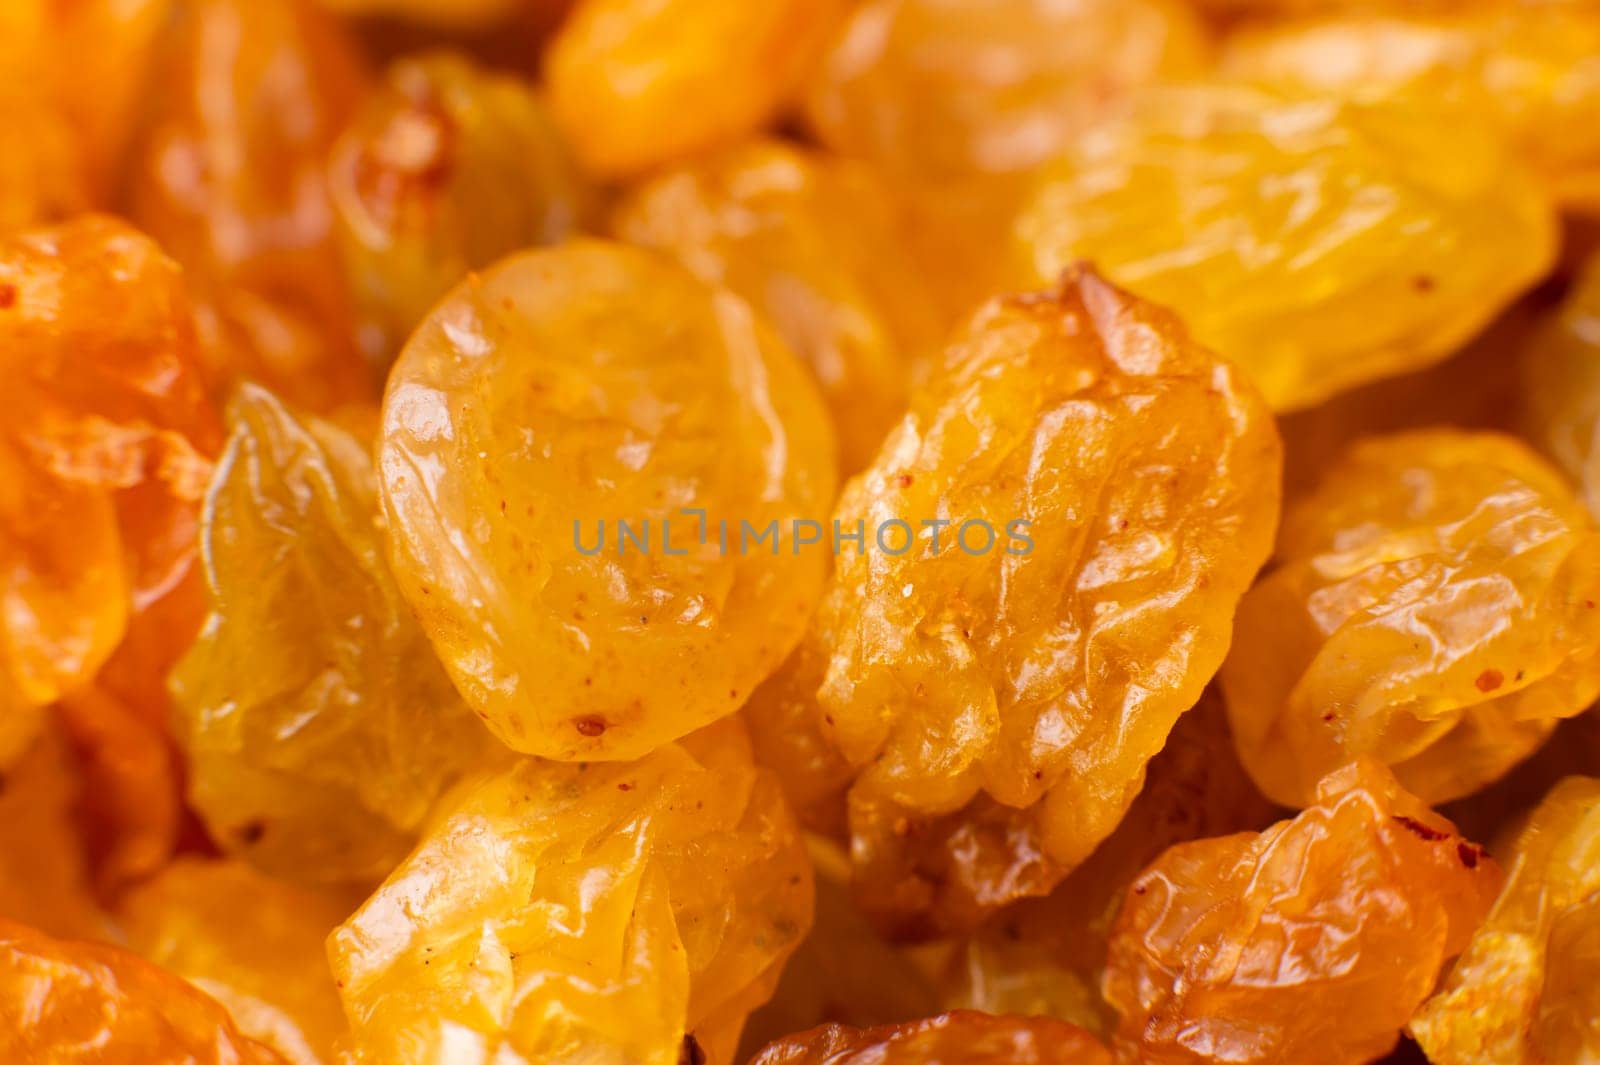 background of raisins in sale in the shop of dried fruit by yanik88